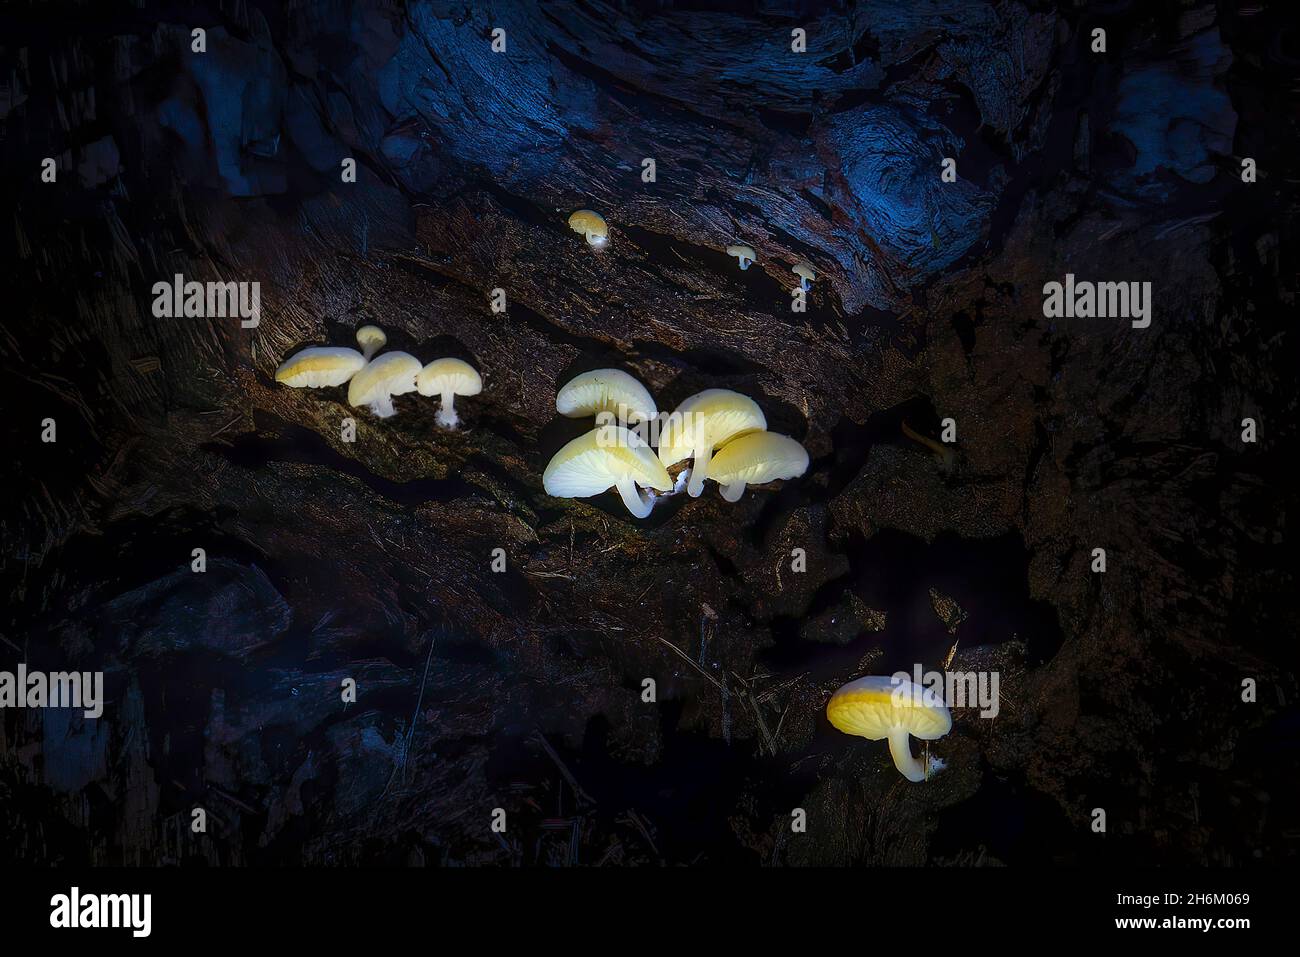 Small mushrooms grow on the inside of a fallen tree trunk in a wooded area of the Florida Everglades. Stock Photo